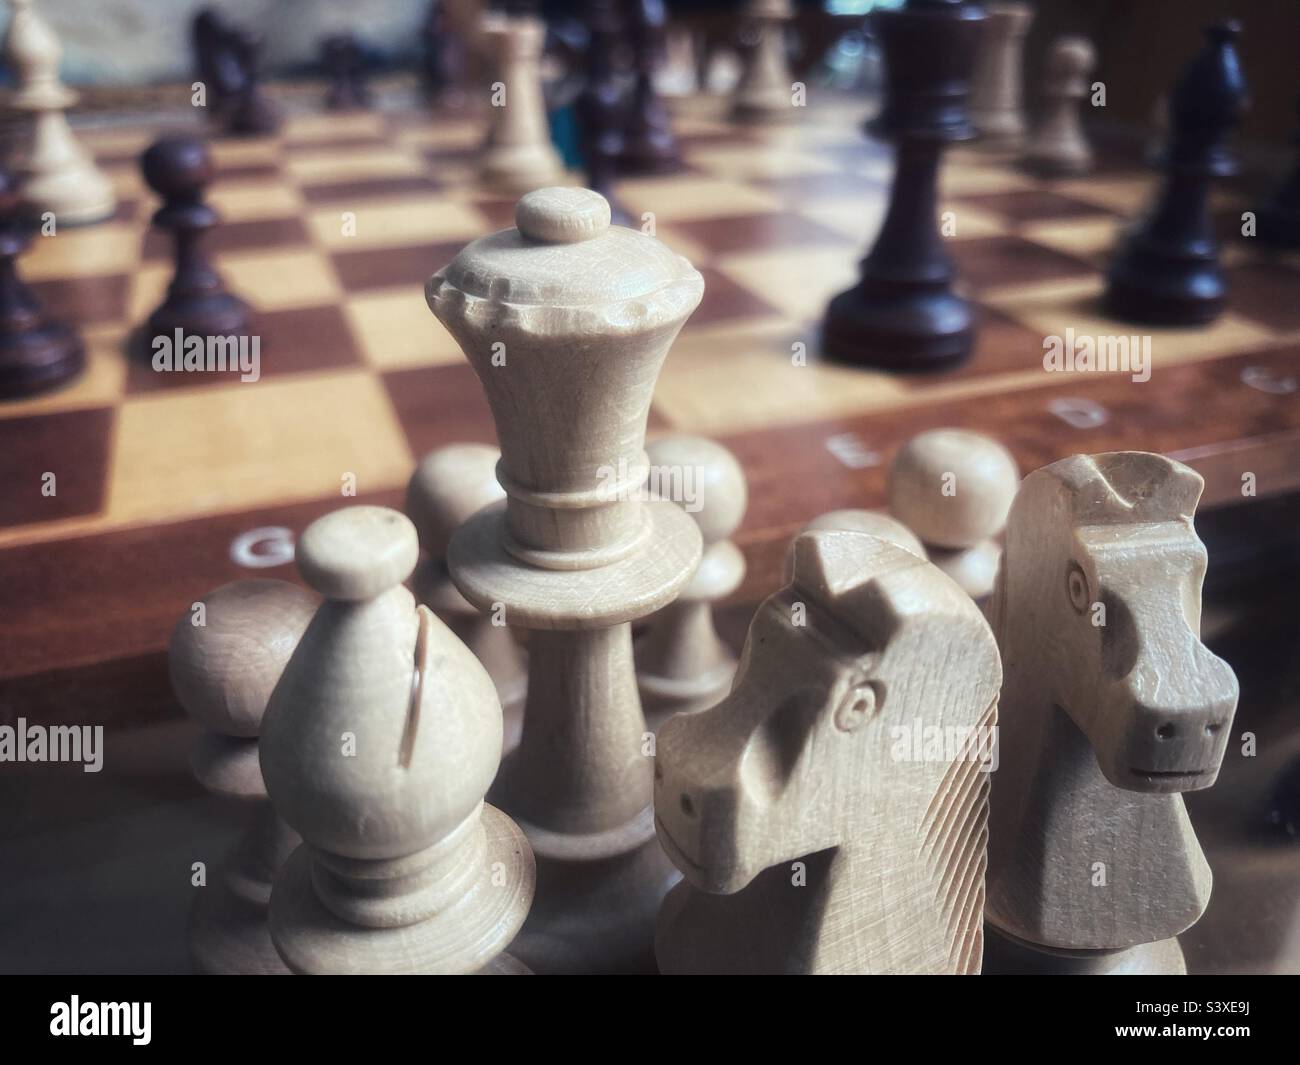 Chess pieces that were taken during a game on a board in the background Stock Photo